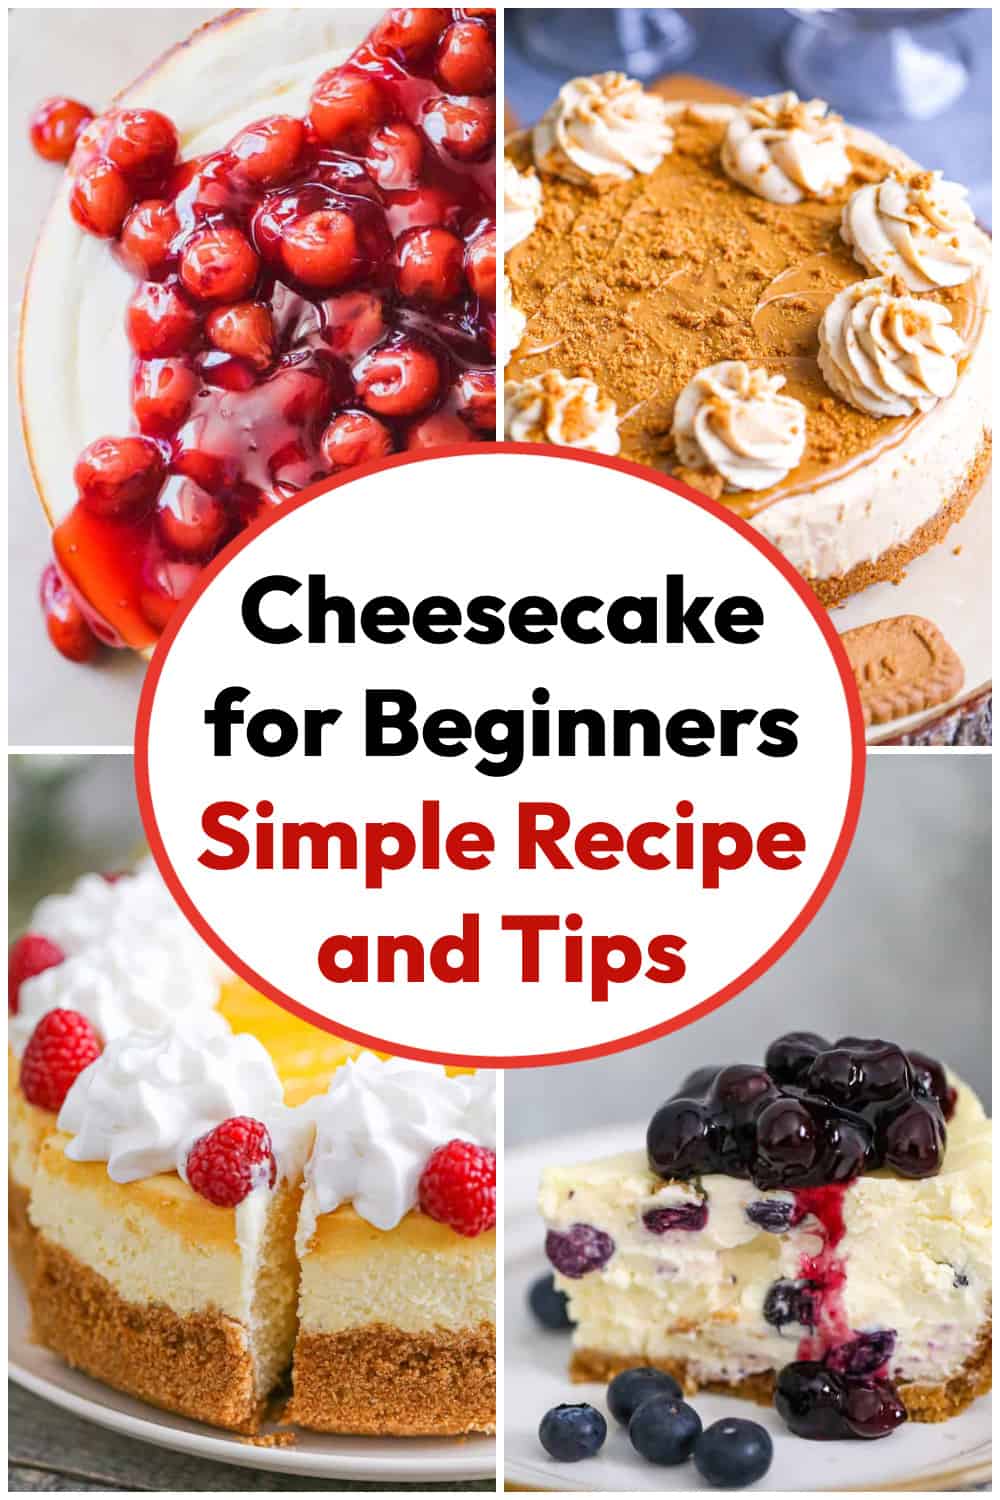 Cheesecake for Beginners: Simple Recipe and Tips